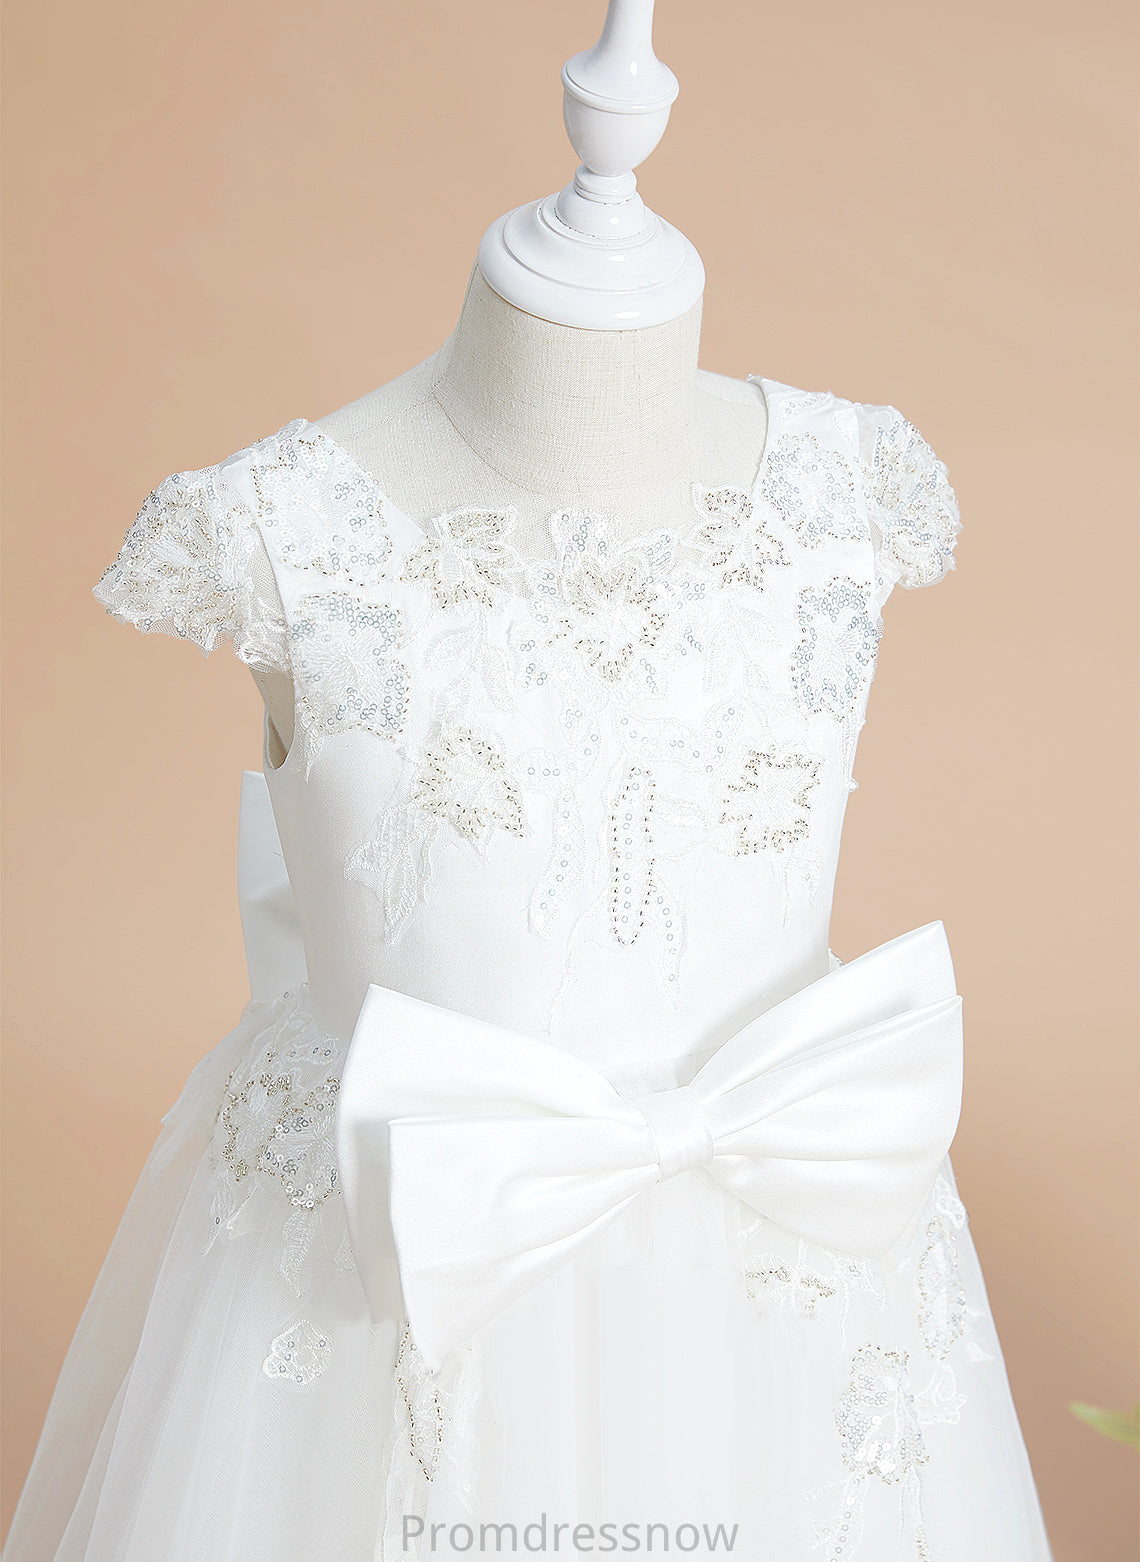 Sequins/Bow(s) Neck - Tulle/Lace Tea-length Girl Flower Girl Dresses Short A-Line Flower Scoop Dress Leah With Sleeves